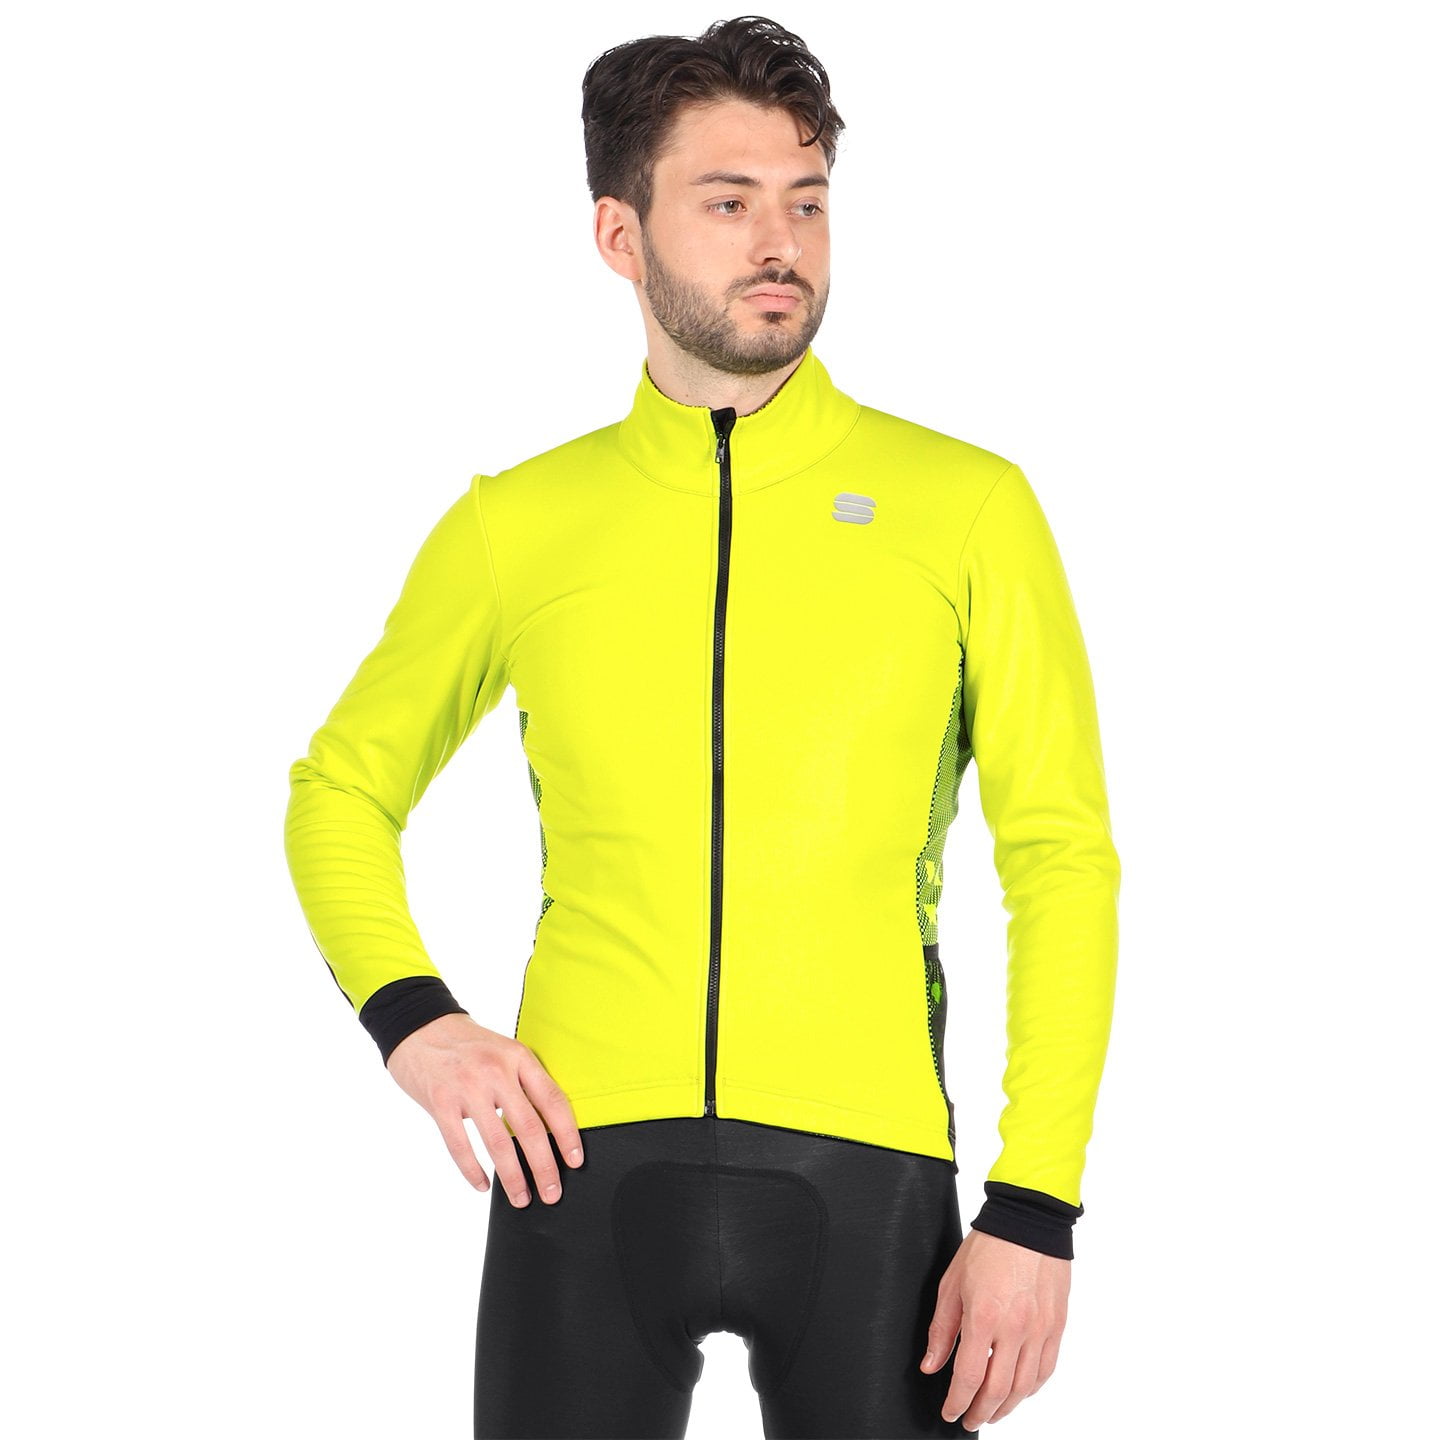 SPORTFUL Neo Winter Jacket, for men, size L, Winter jacket, Cycle clothing